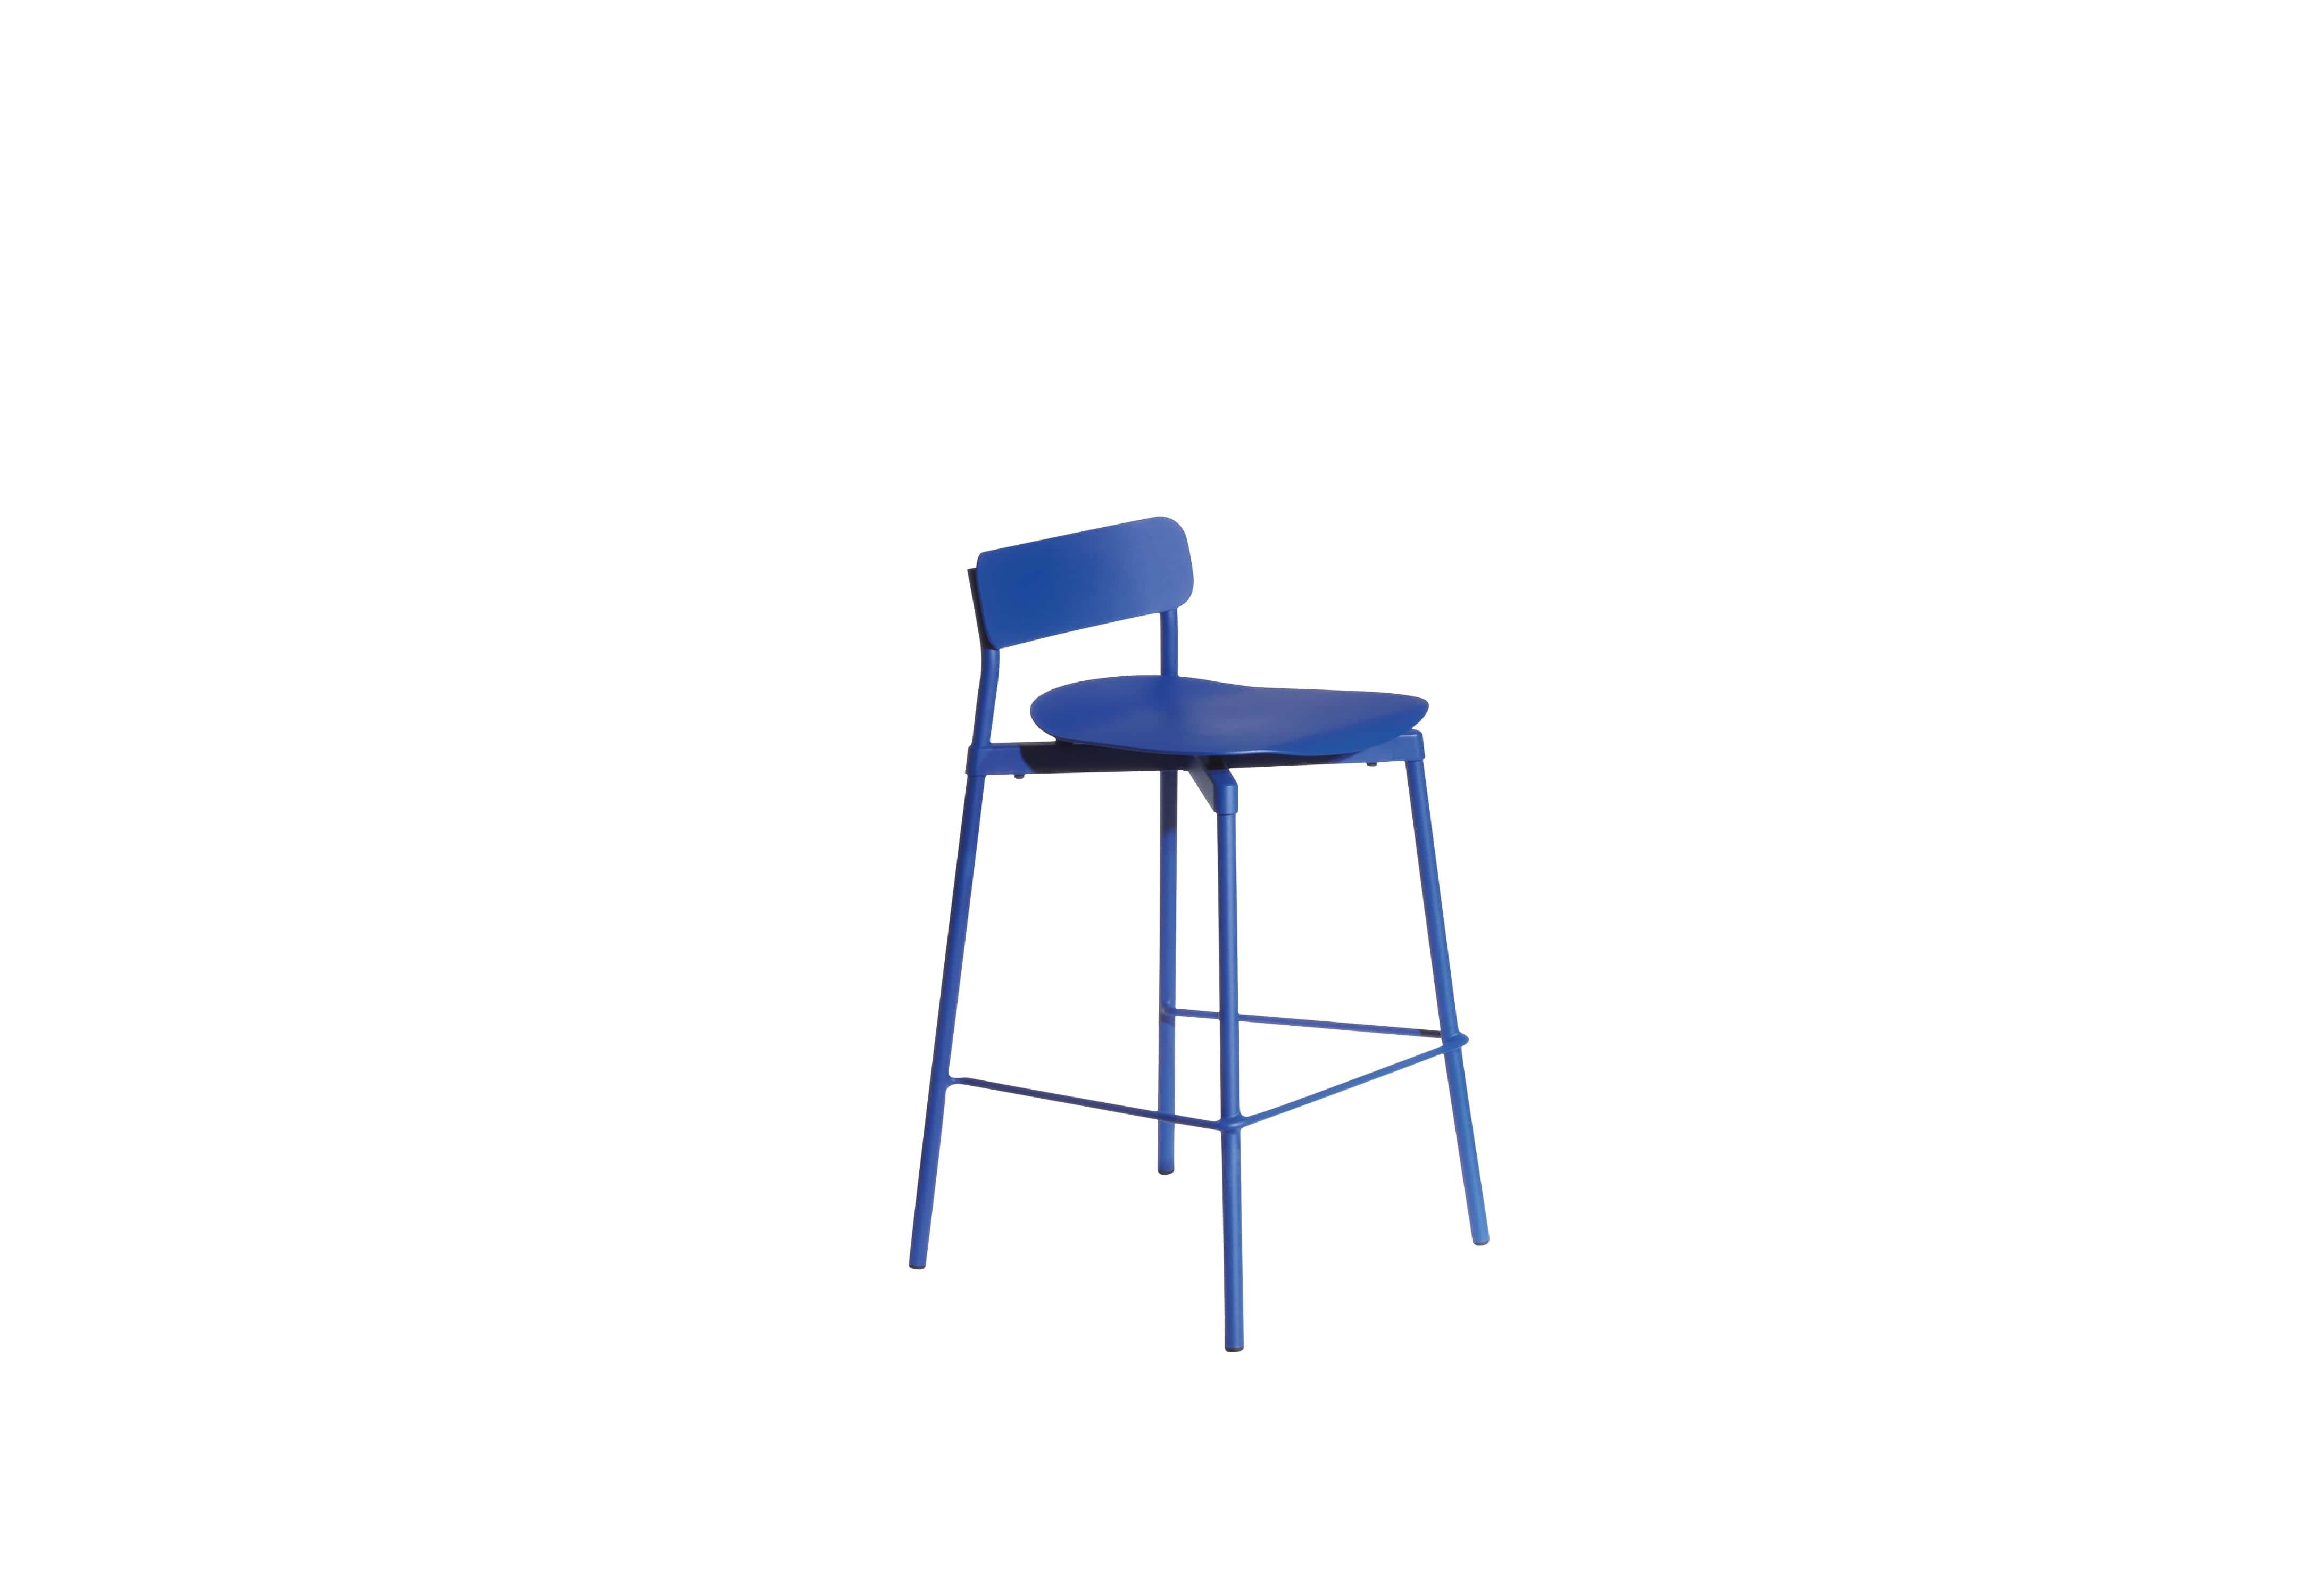 Petite Friture Small Fromme Bar stool in Blue Aluminium by Tom Chung, 2020

The Fromme collection stands out by its pure line and compact design. Absorbers placed under the seating gives a soft and very comfortable flexibility to seats. Made from